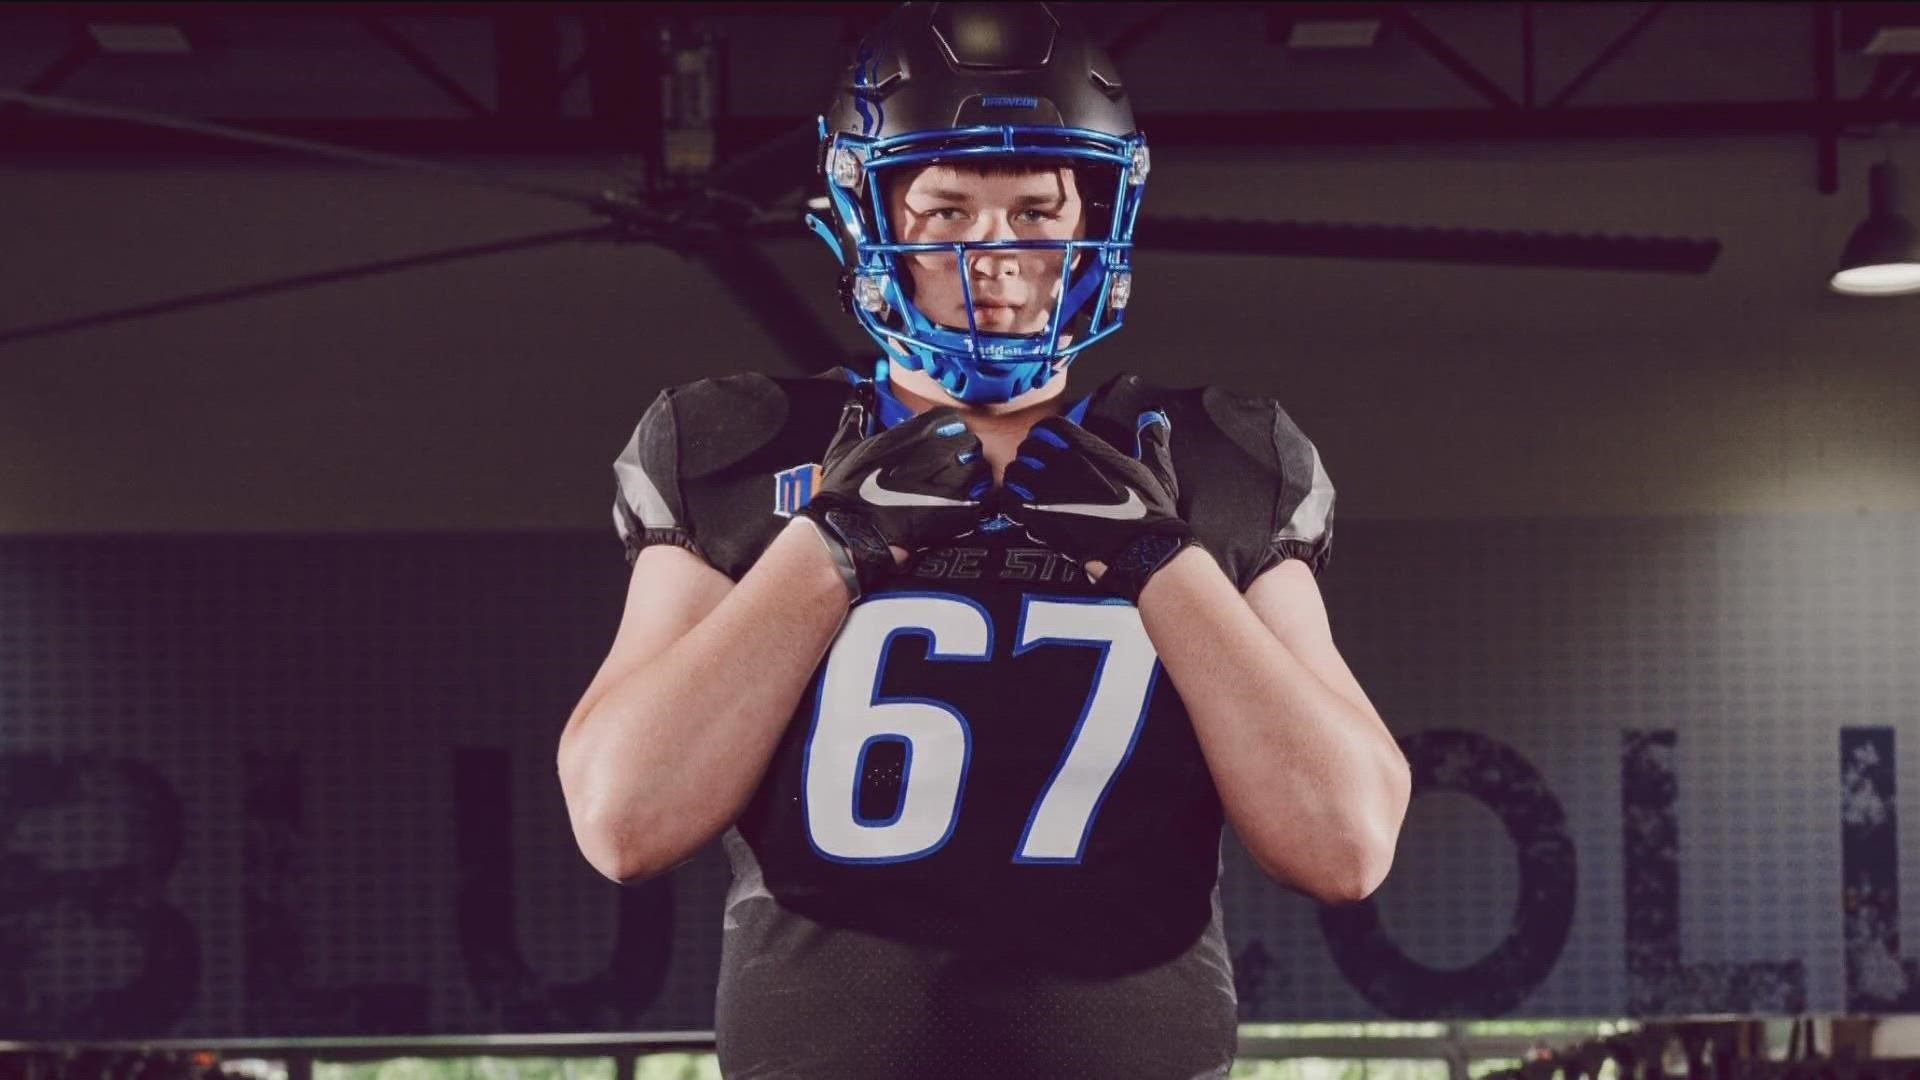 Rasmussen is a 6-5, 300 pound tackle for the Storm. He chose Boise State over offers from San Diego State and others.